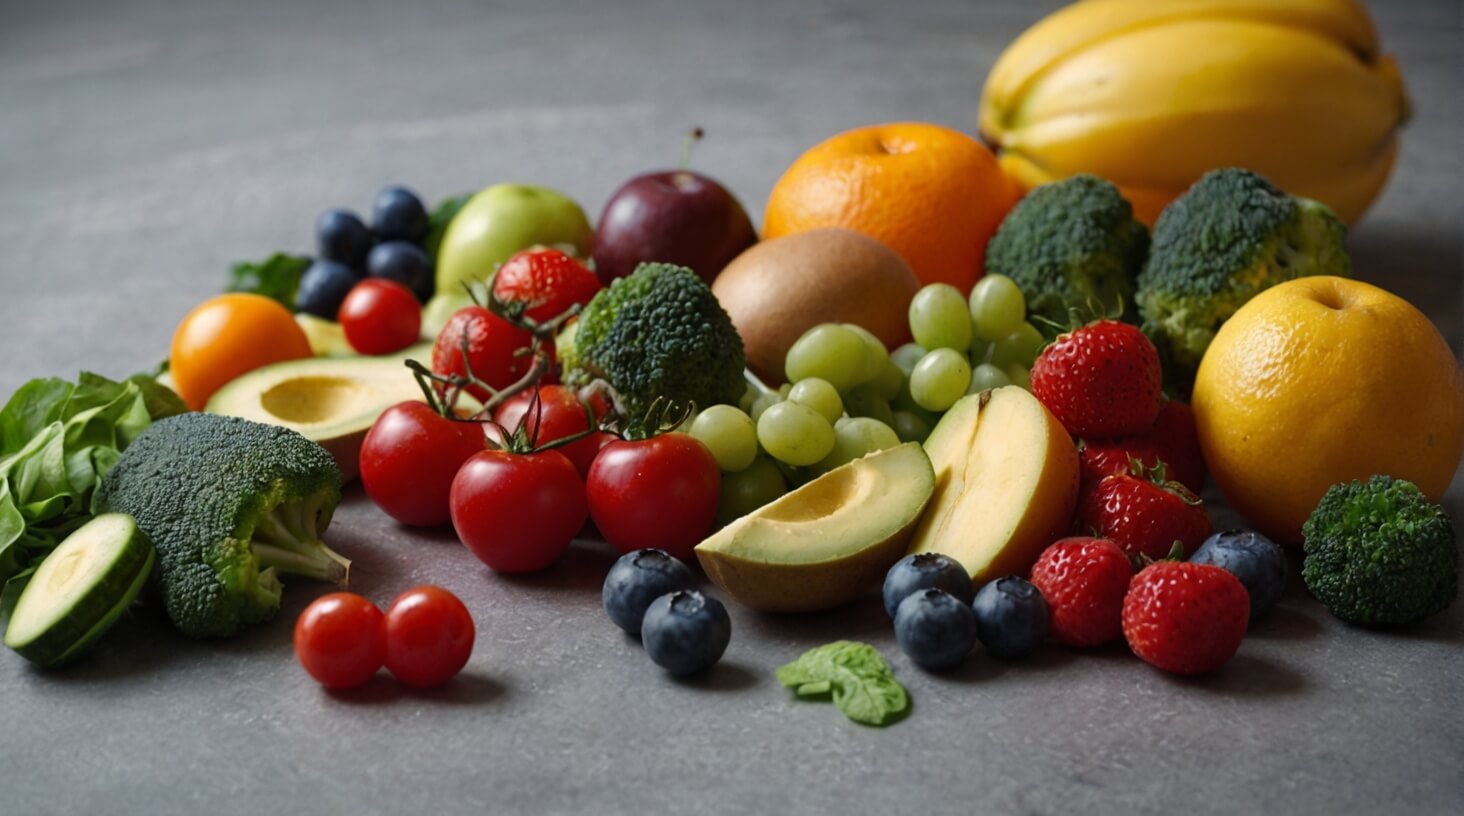 Image depicting various fruits, vegetables, and grains arranged in a balanced diet composition, symbolizing the importance of diet and nutrition for health and well-being.